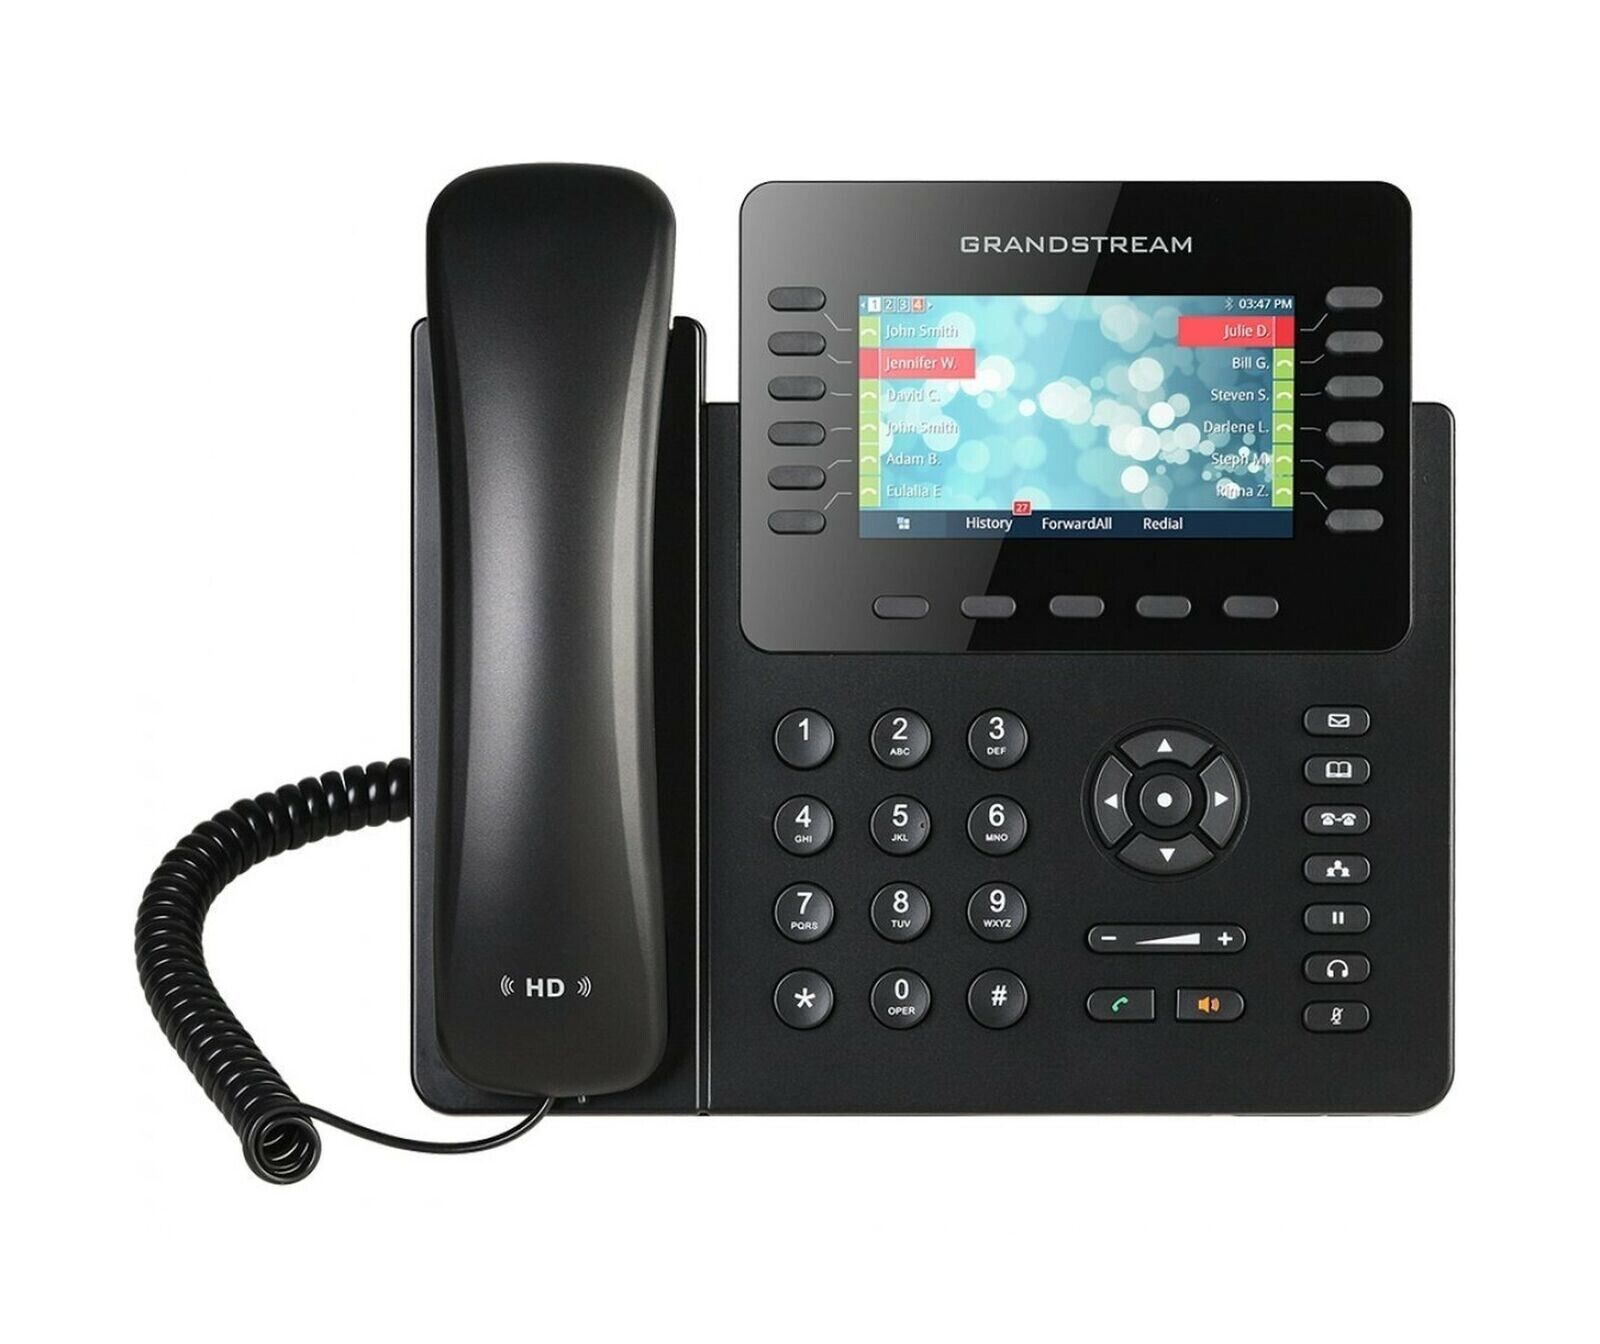 Grandstream GS-GXP2170 VoIP Phone & Device Includes Power Chord - 